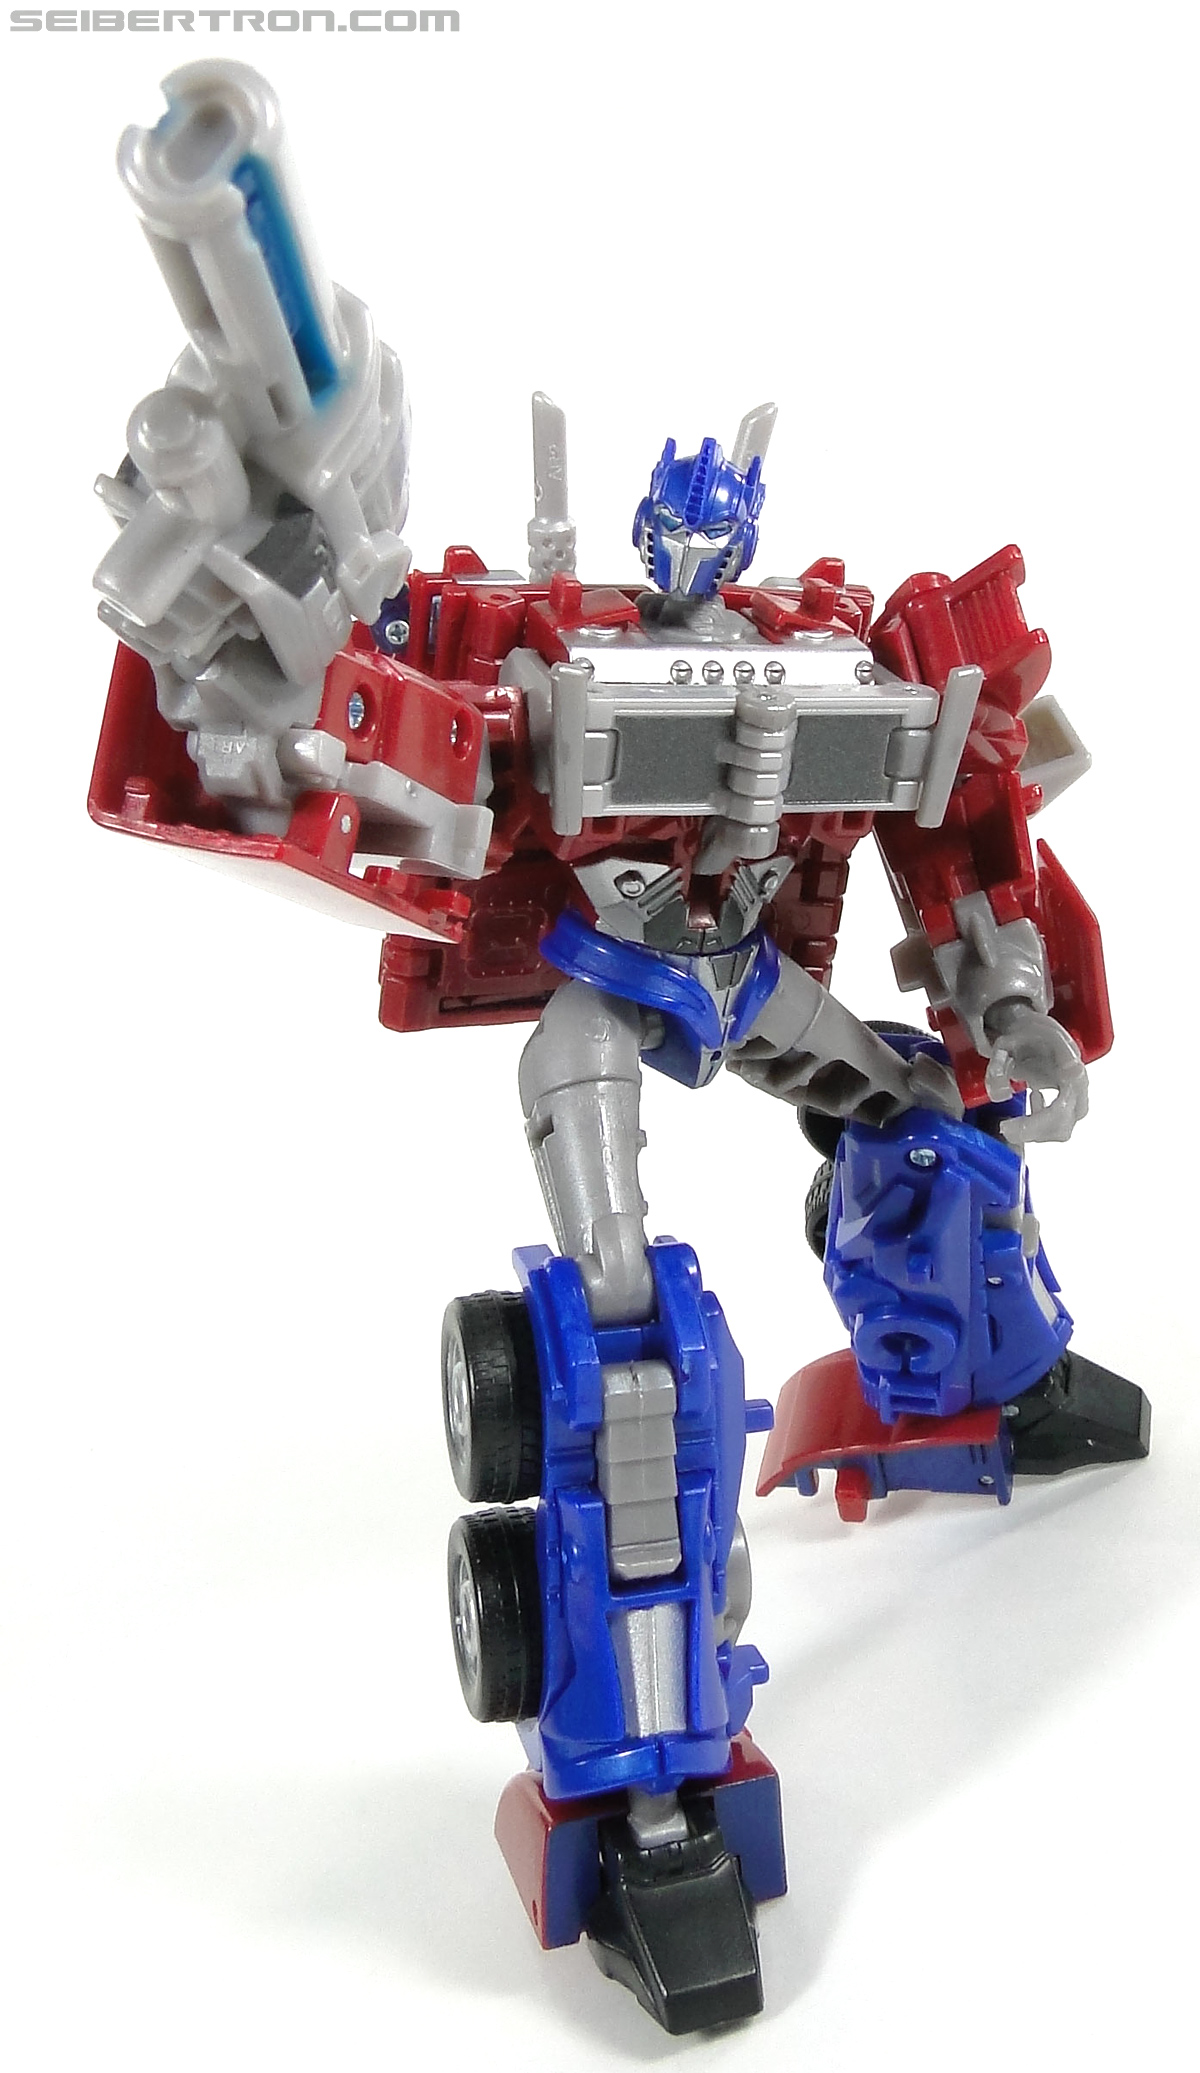 Transformers Prime: First Edition Optimus Prime (Image #123 of 170)